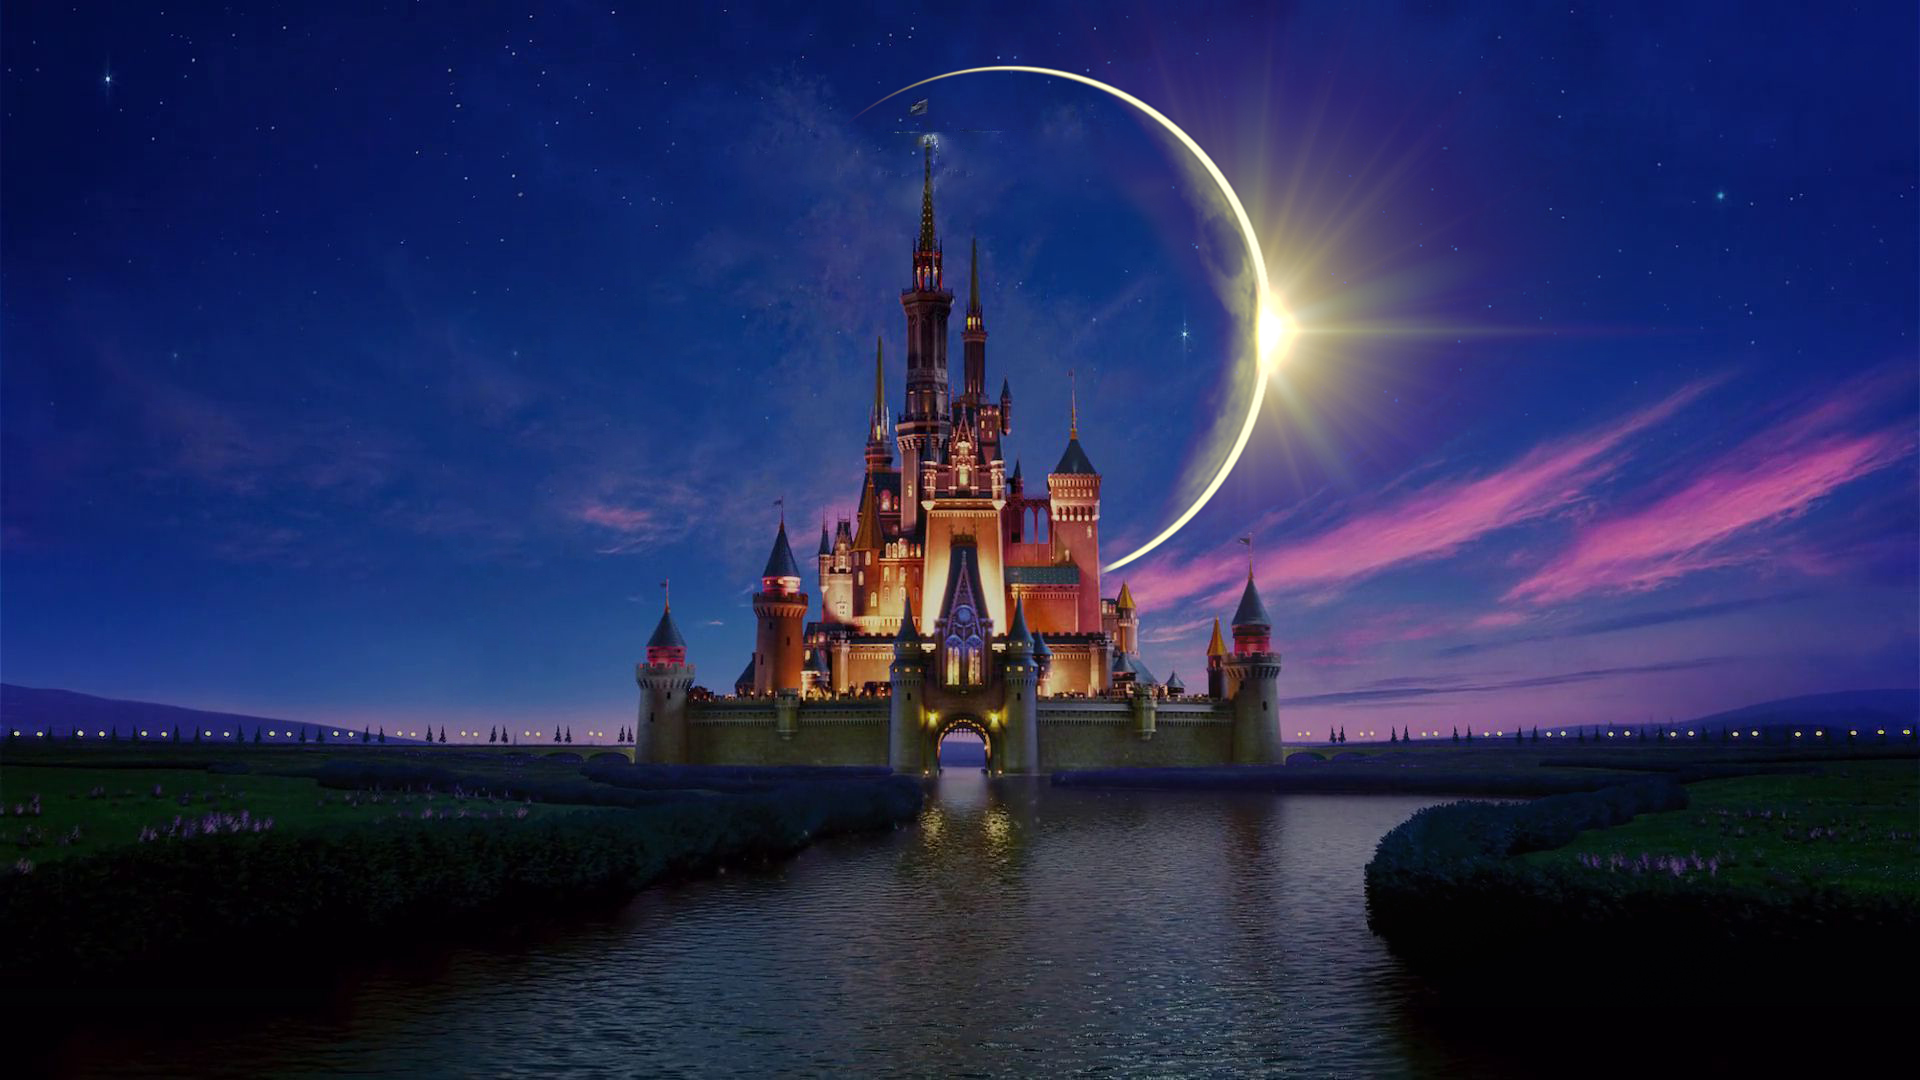 BREAKING NEWS: LUNACY PRODUCTIONS TO ACQUIRE THE WALT DISNEY COMPANY